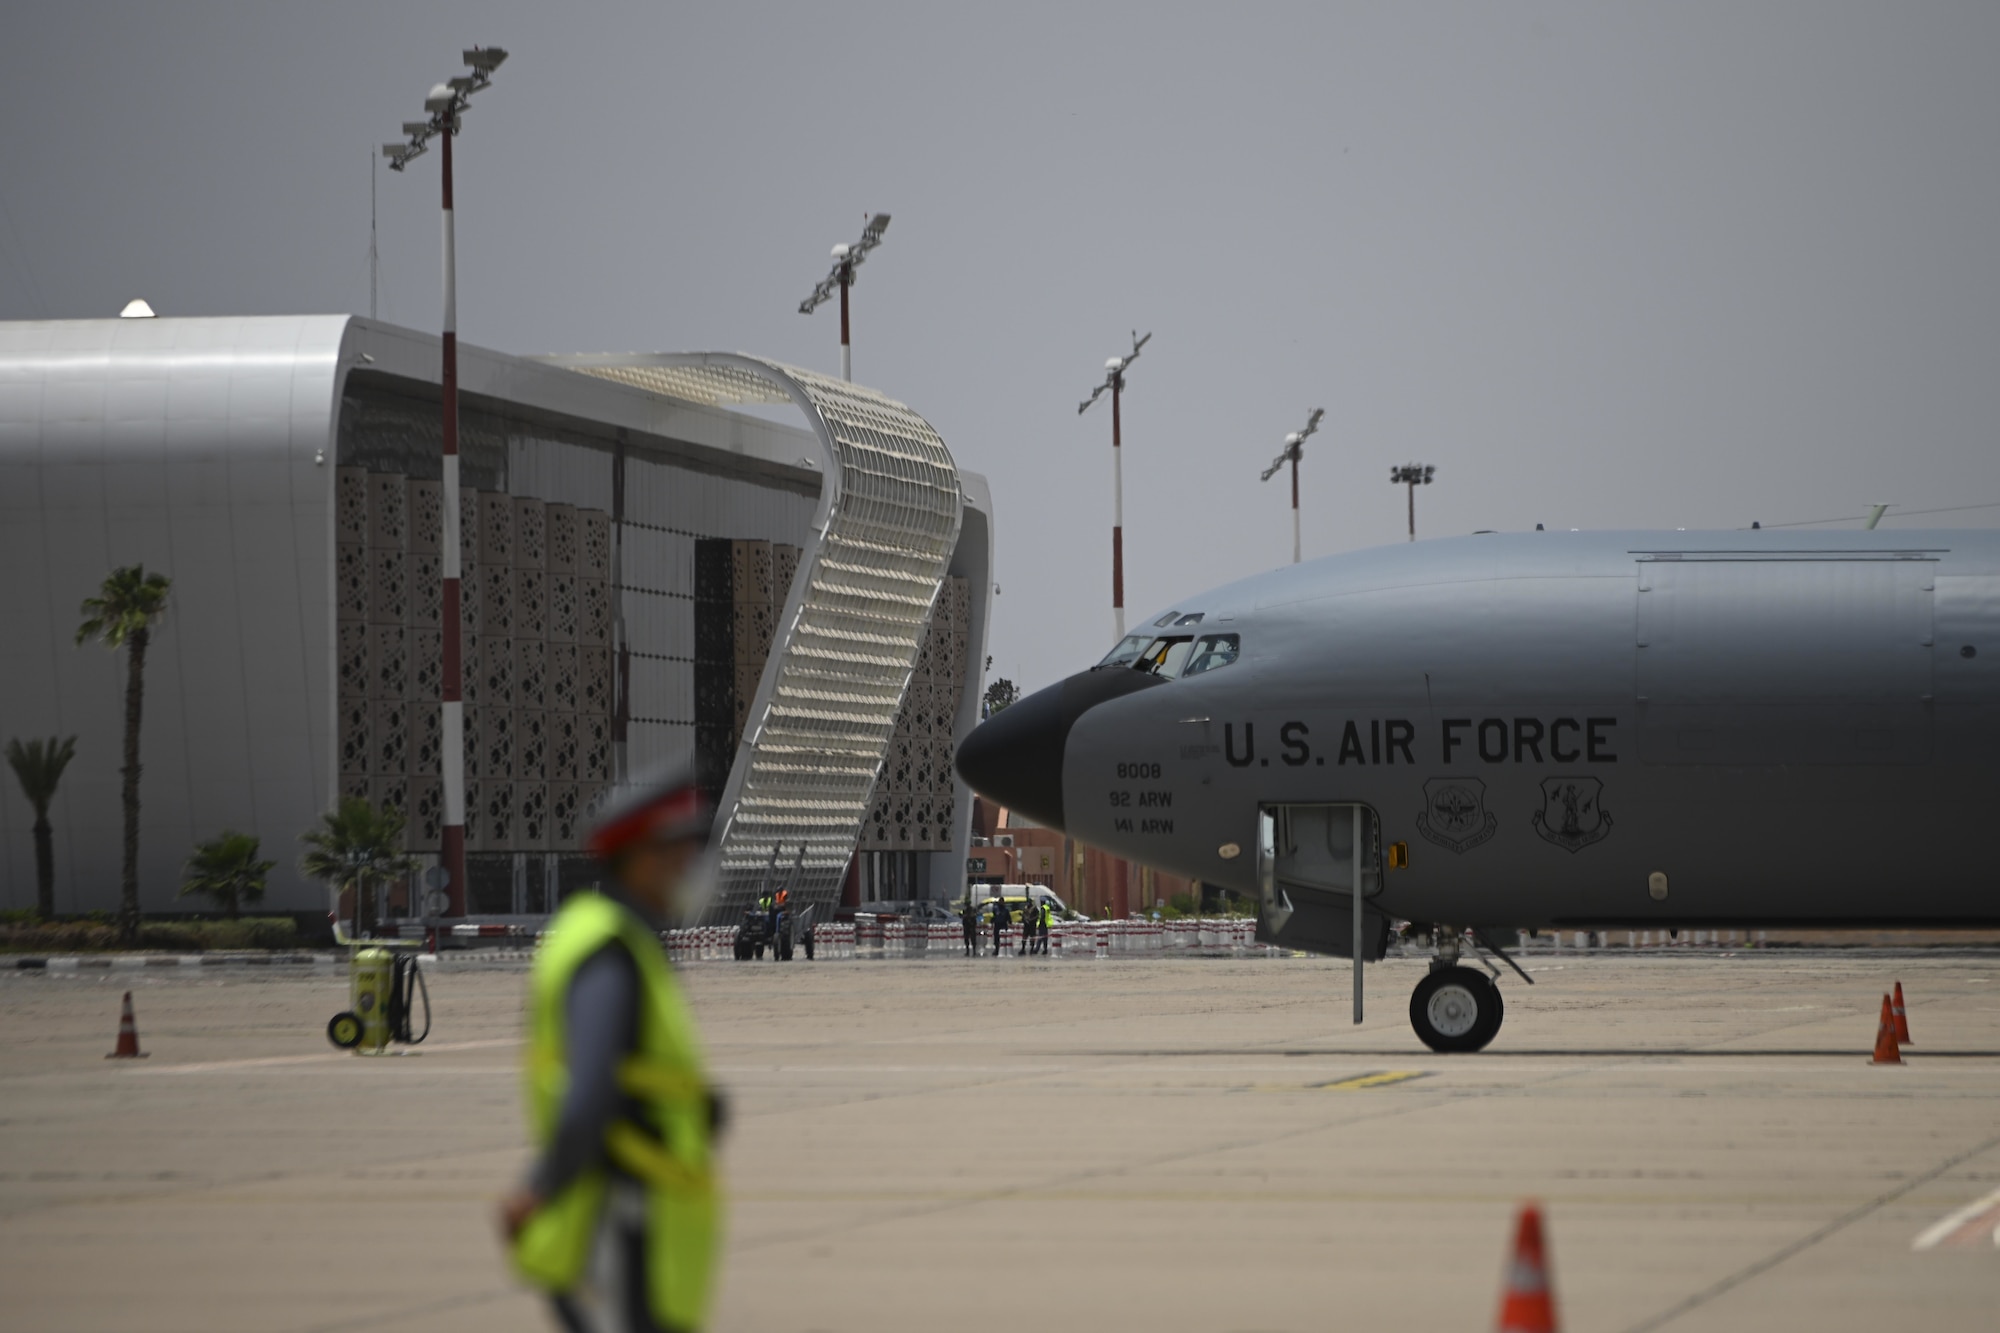 A U.S. Air Force KC-135 Stratotanker aircraft assigned to the 100th Air Refueling Wing, Royal Air Force Mildenhall, England, sits on the flight line of Marrakesh Menara Airport, Morocco, during Exercise African Lion 2021, June, 15, 2021. During African Lion, the KC-135s will provide critical air refueling support to U.S. and Moroccan fighters, promoting interoperability. 



African Lion is U.S. Africa Command's largest, premier, joint, annual exercise hosted by Morocco, Tunisia and Senegal, 7-18 June. More than 7,000 participants from nine nations and NATO train together with a focus on enhancing readiness for U.S. and partner nation forces. African Lion is a multi-domain, multi-component, and multi-national exercise, which employs a full array of mission capabilities with the goal to strengthen interoperability among participants. (U.S. Air Force photo by Senior Airman Joseph Barron)